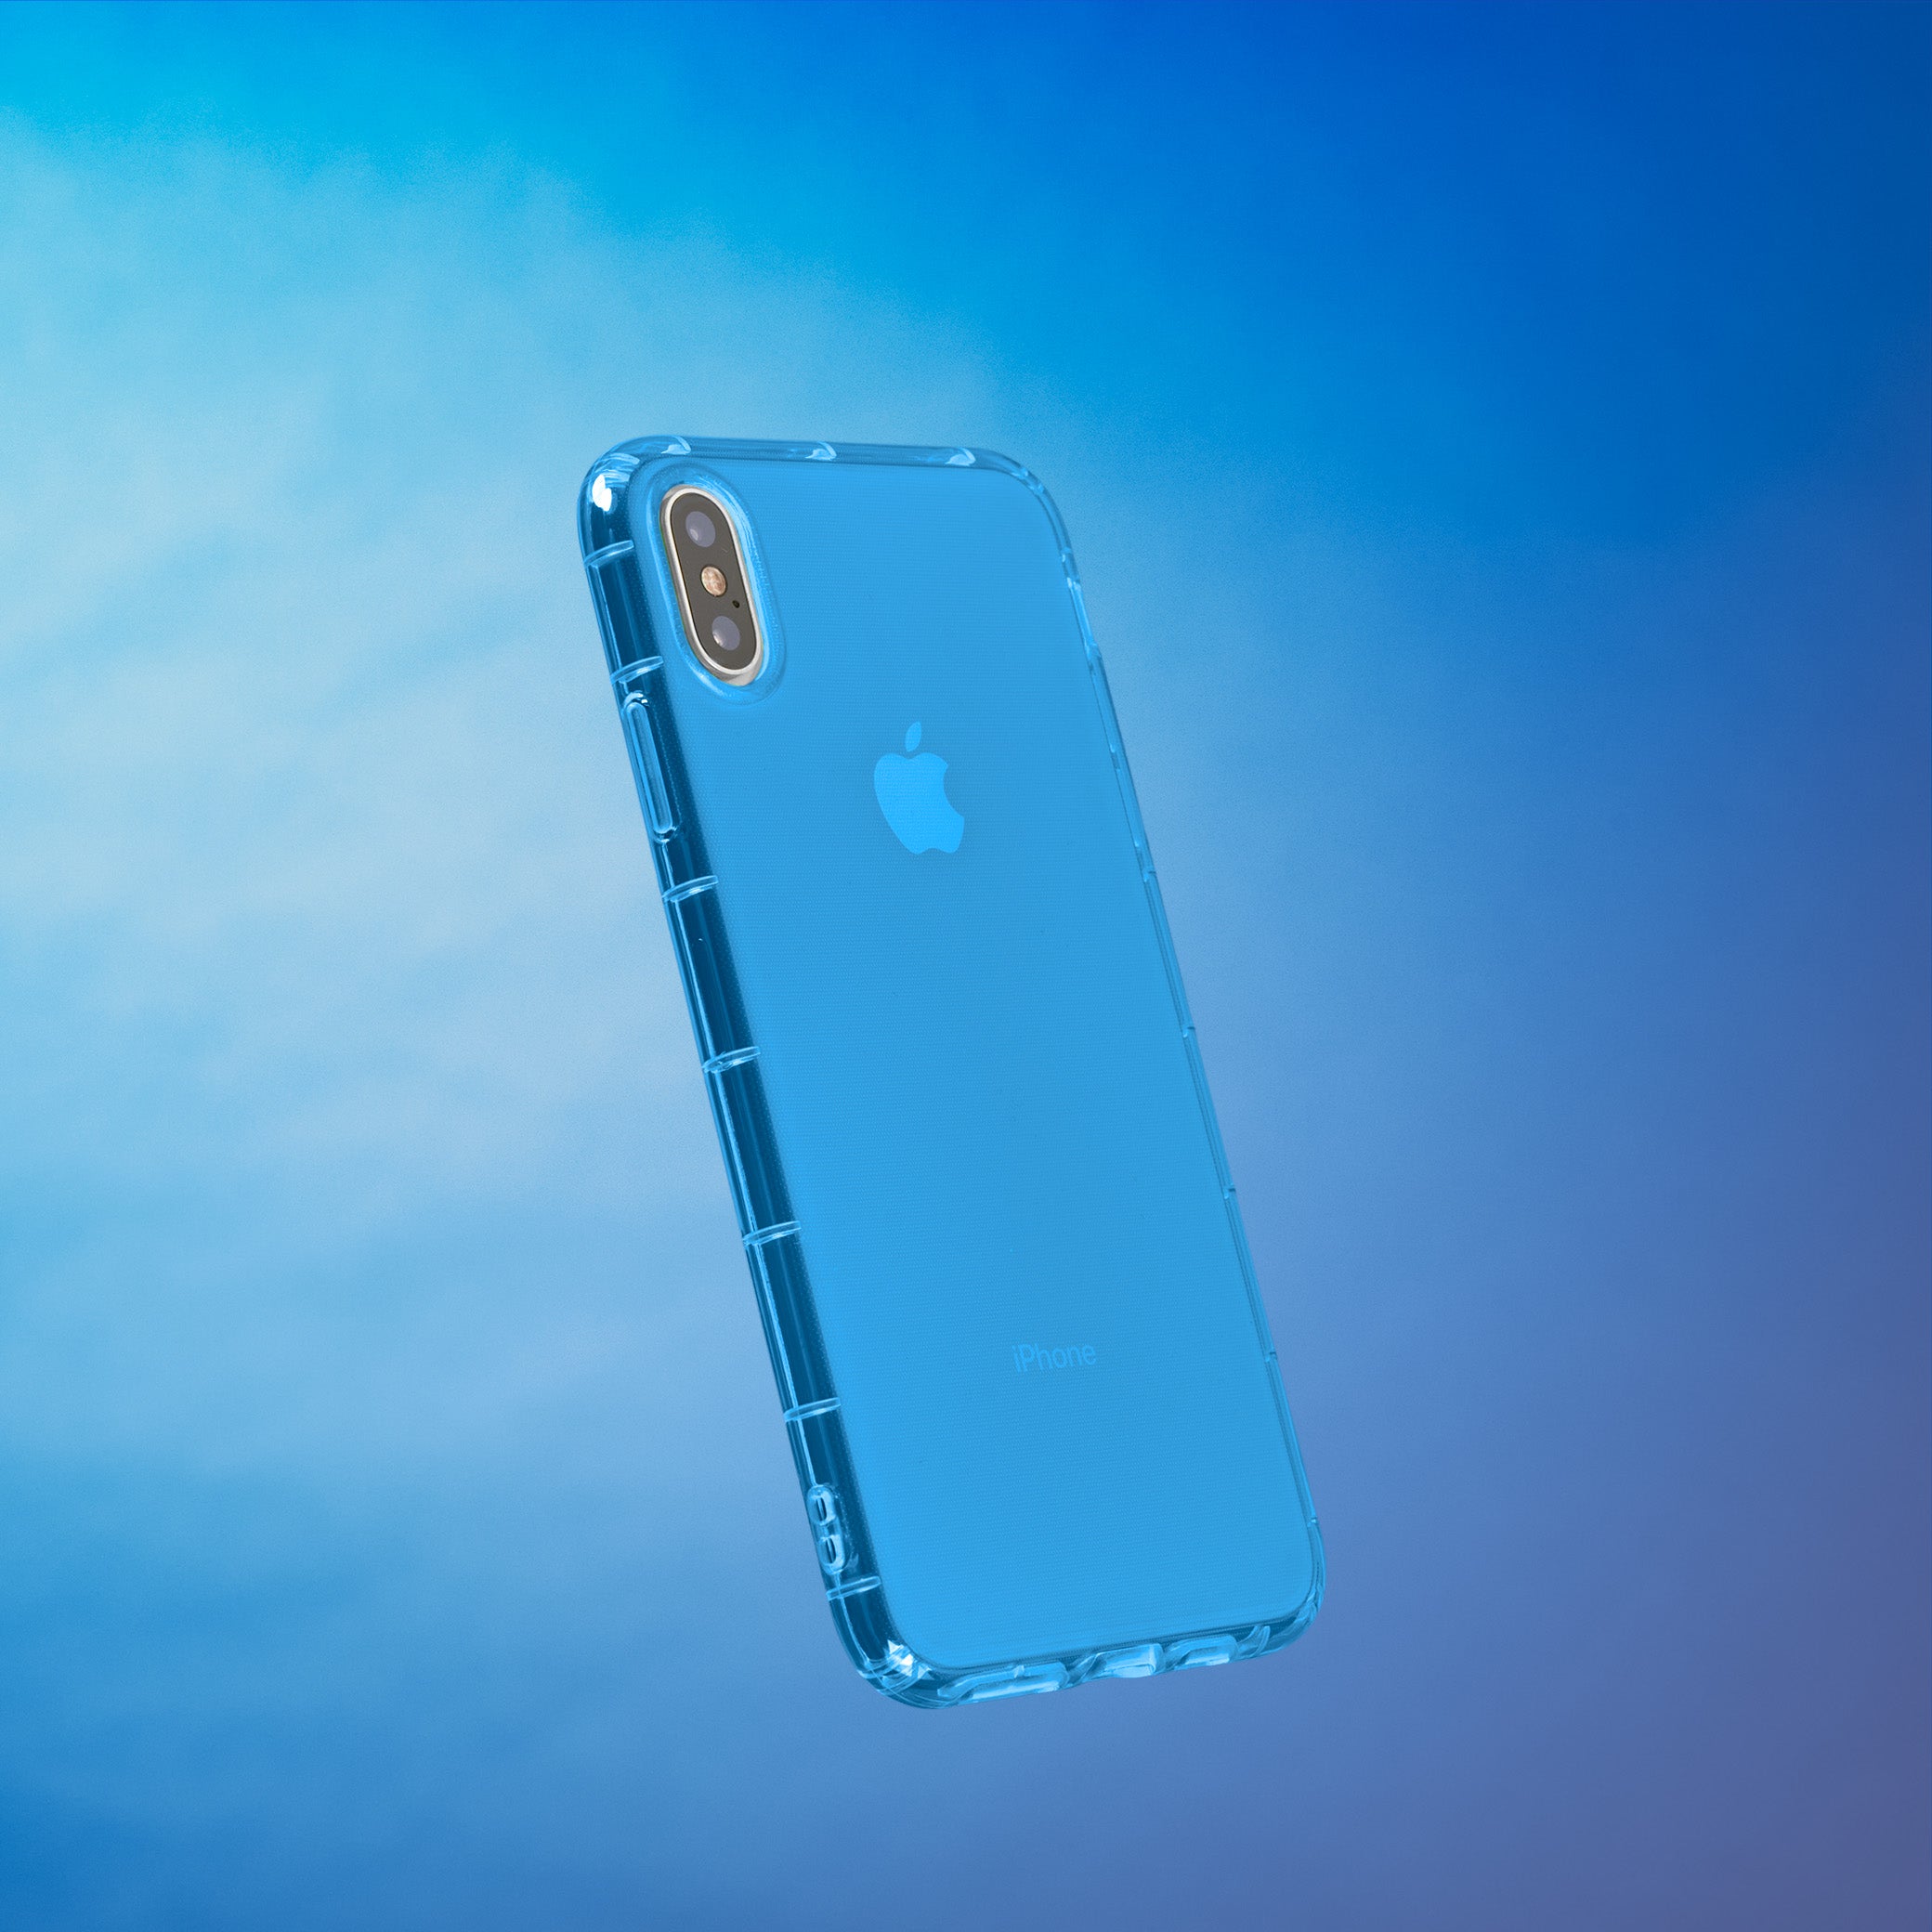 Highlighter Case for iPhone Xs Max - Elevated Azure Blue